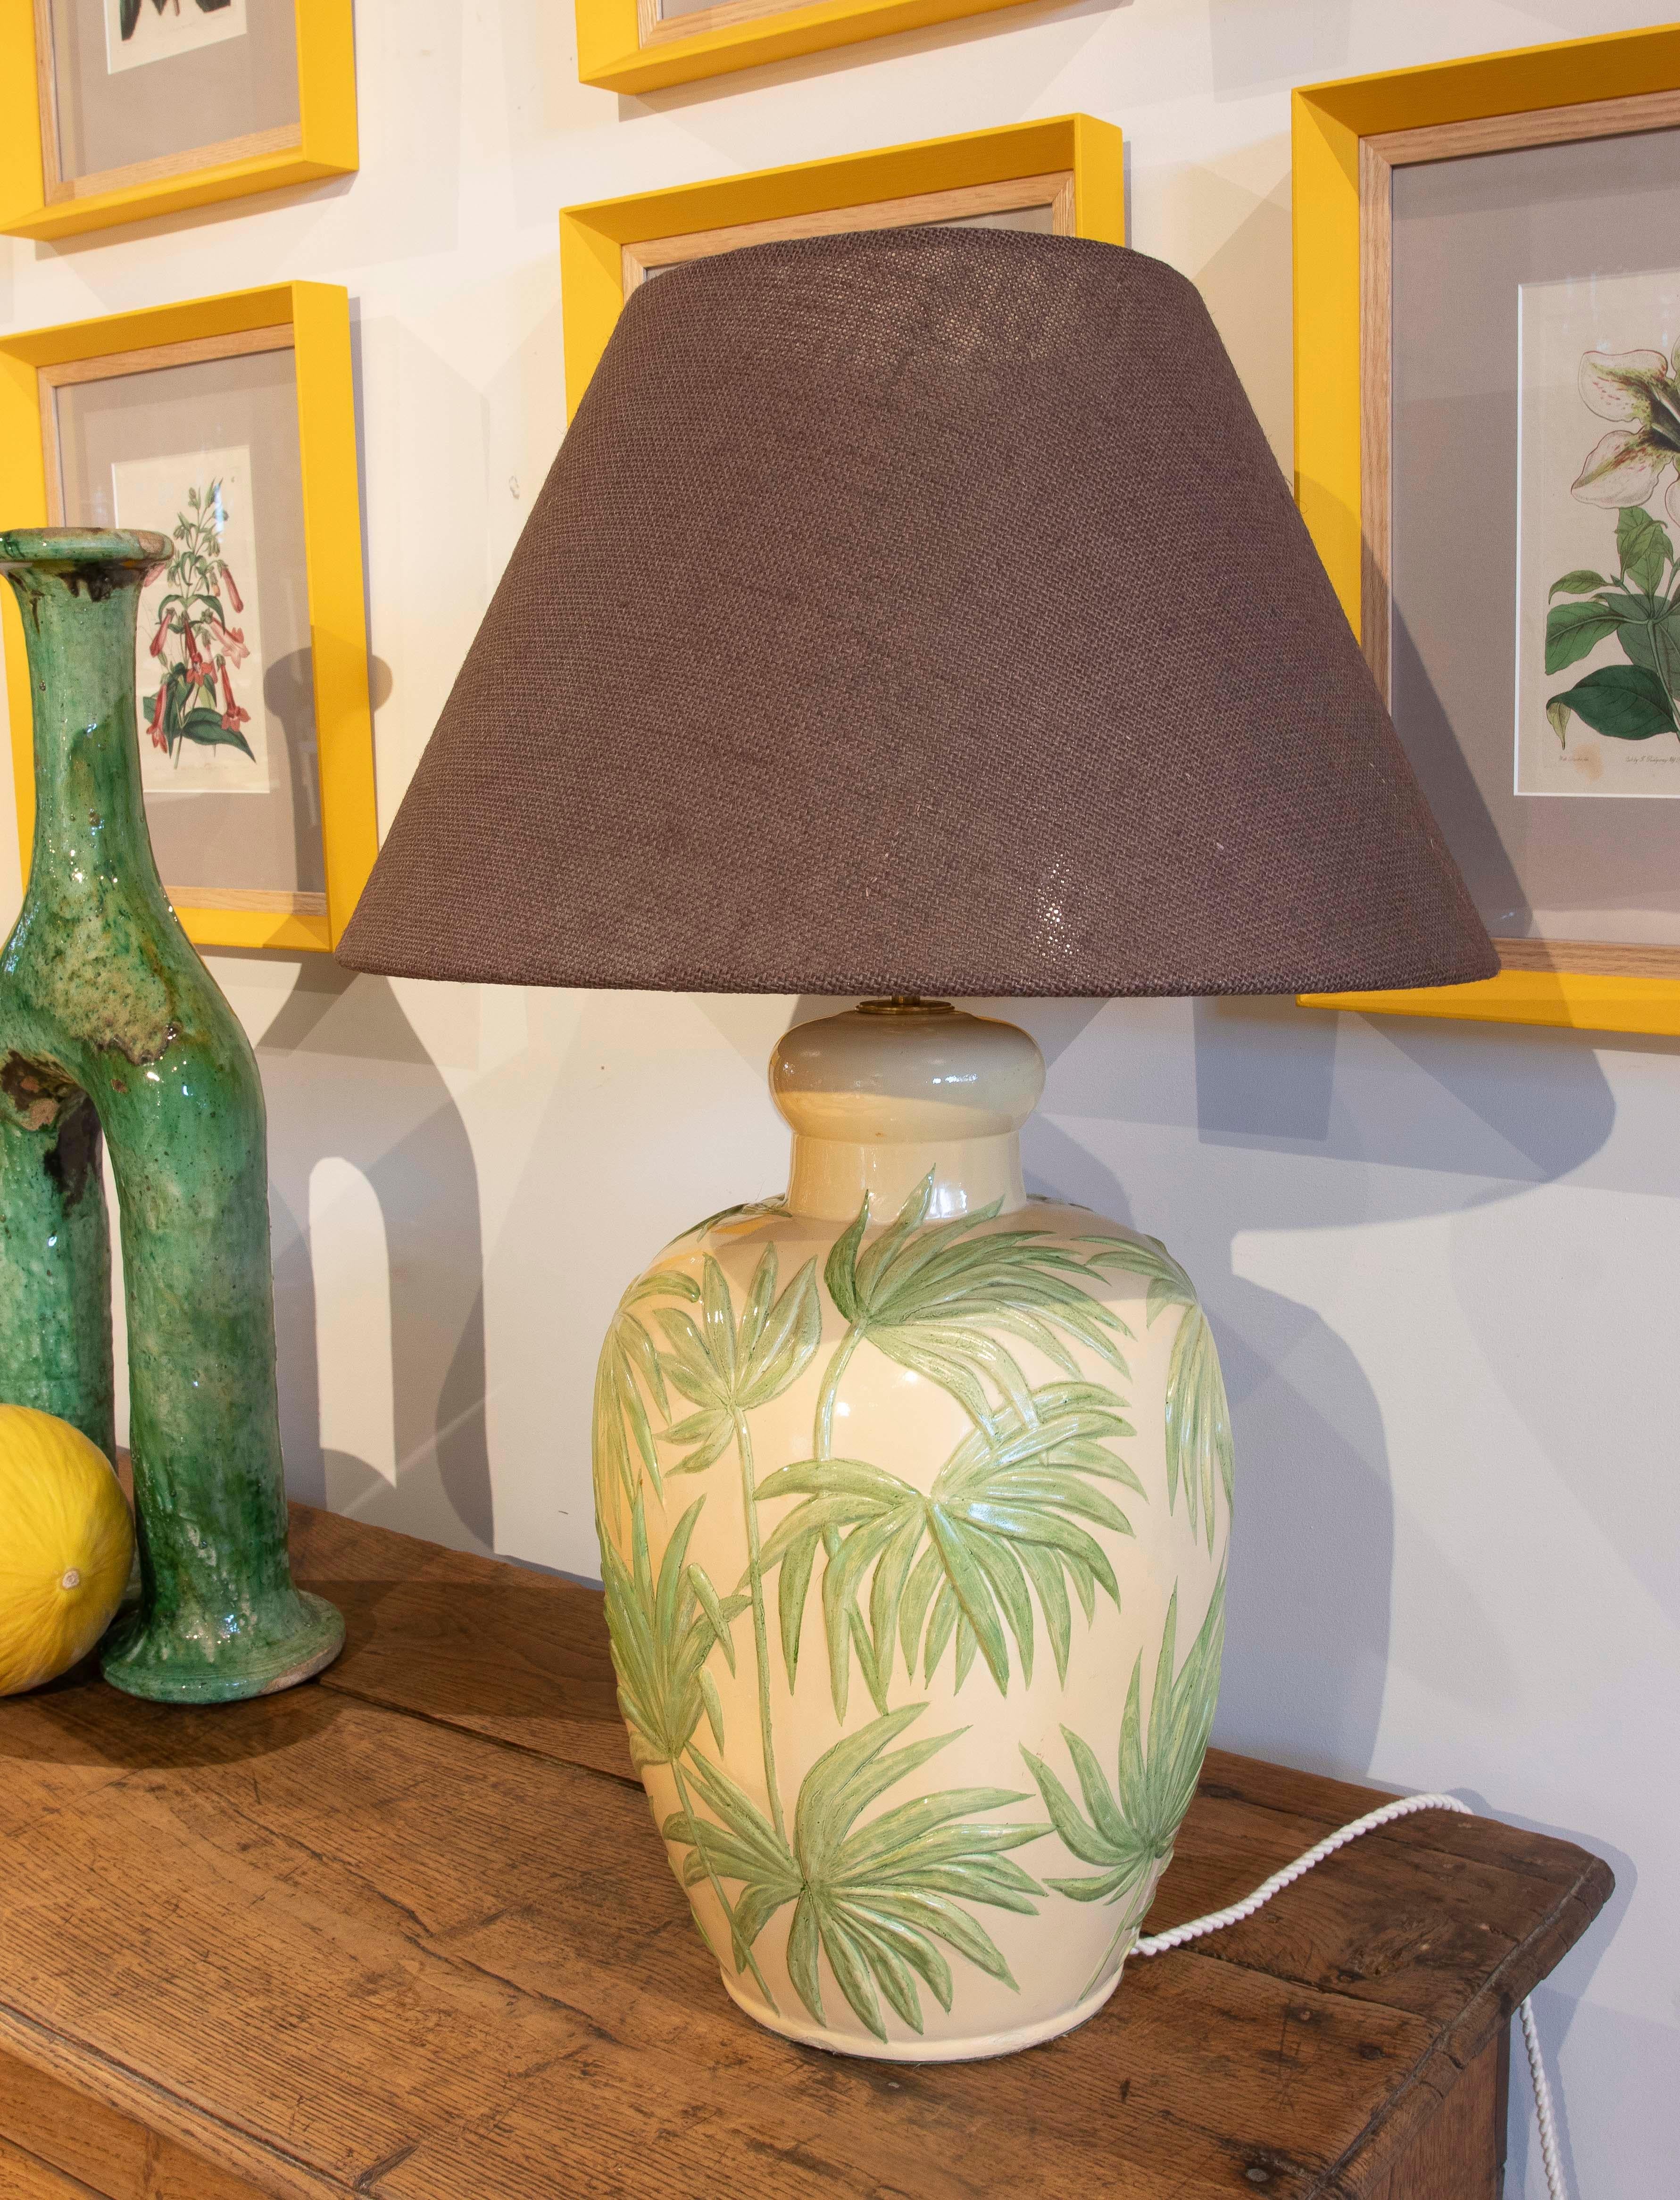 1970s Ceramic Lamp with Palm Tree Decoration 
The Height Includes the Screen